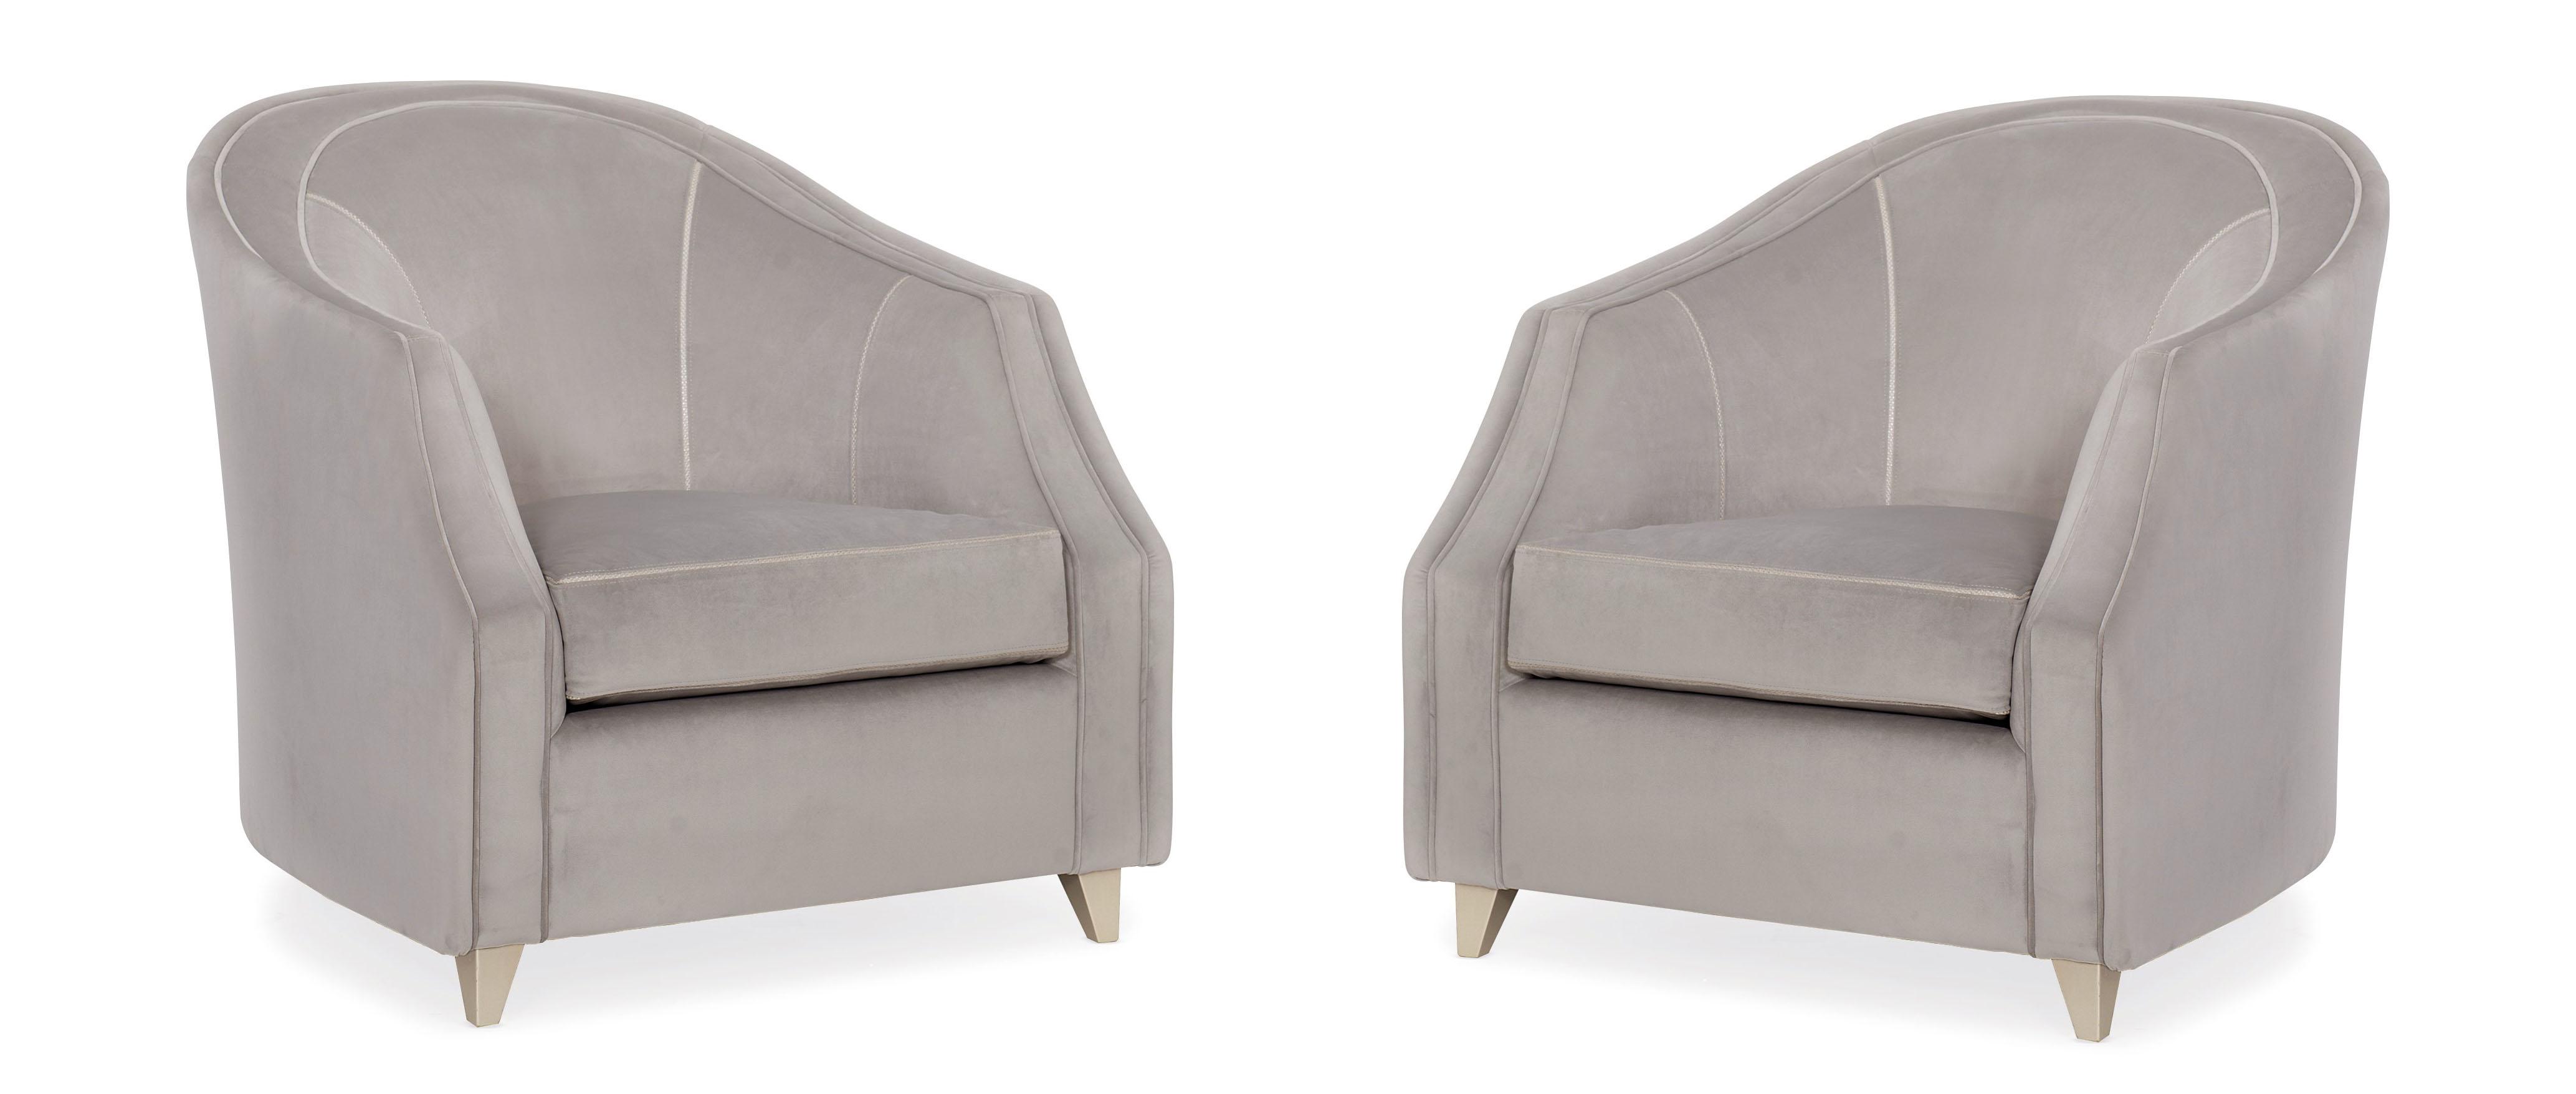 

    
Dove Grey Velvet Fabric & Taupe Paint Finish Accent Chair Set 2Pcs SEAMS TO ME by Caracole
